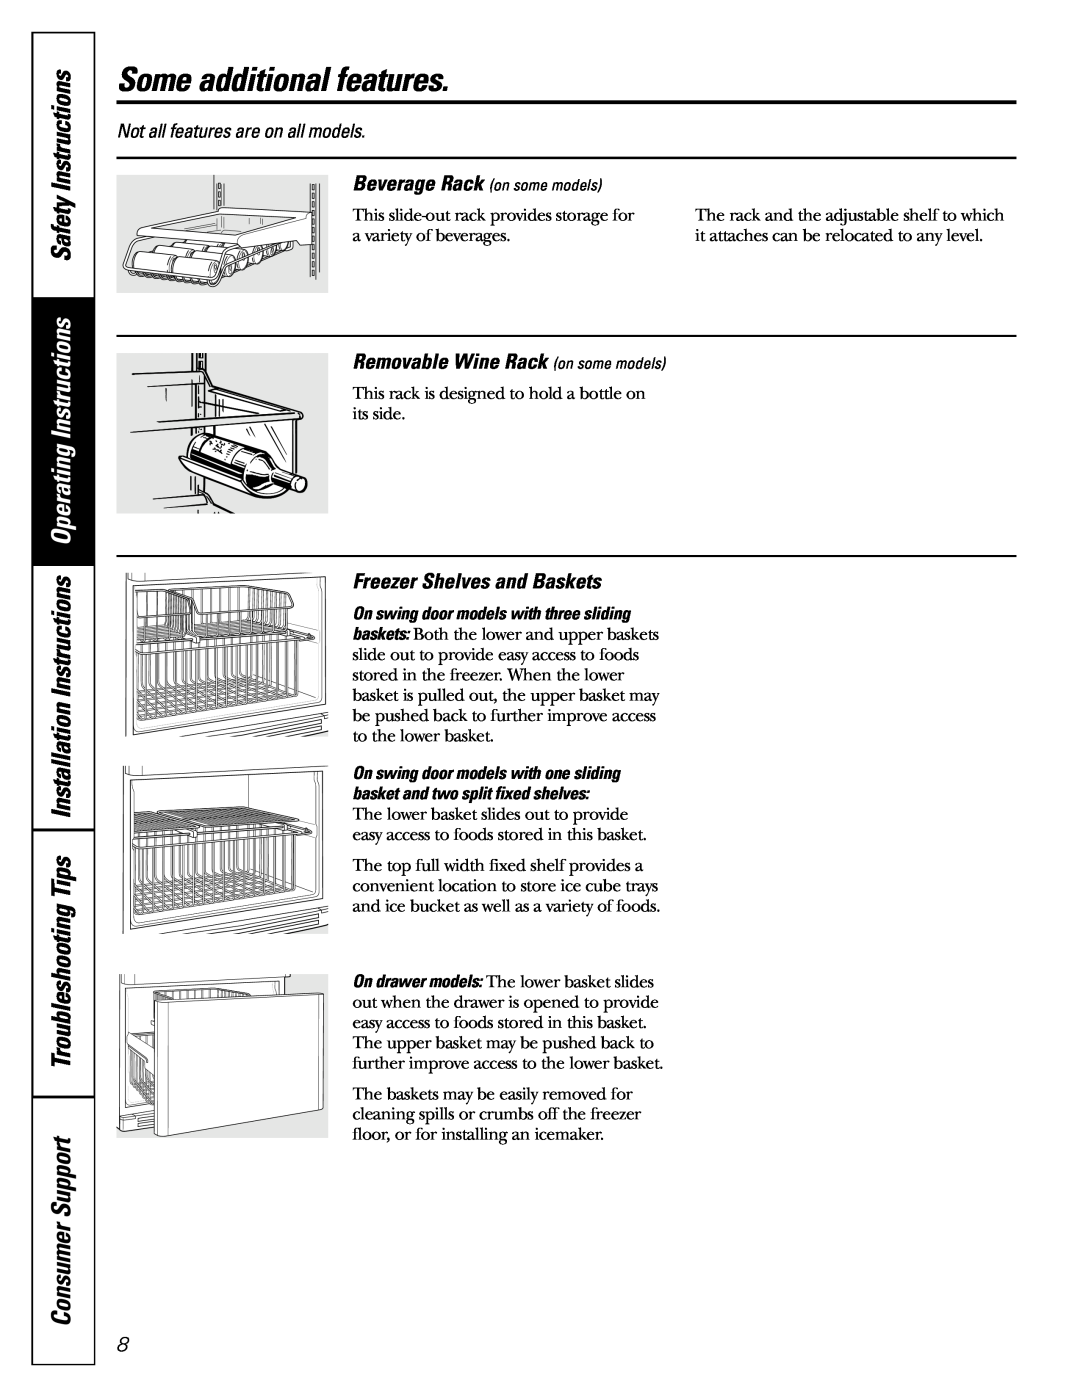 GE 18 installation instructions Some additional features, Removable Wine Rack on some models, Freezer Shelves and Baskets 